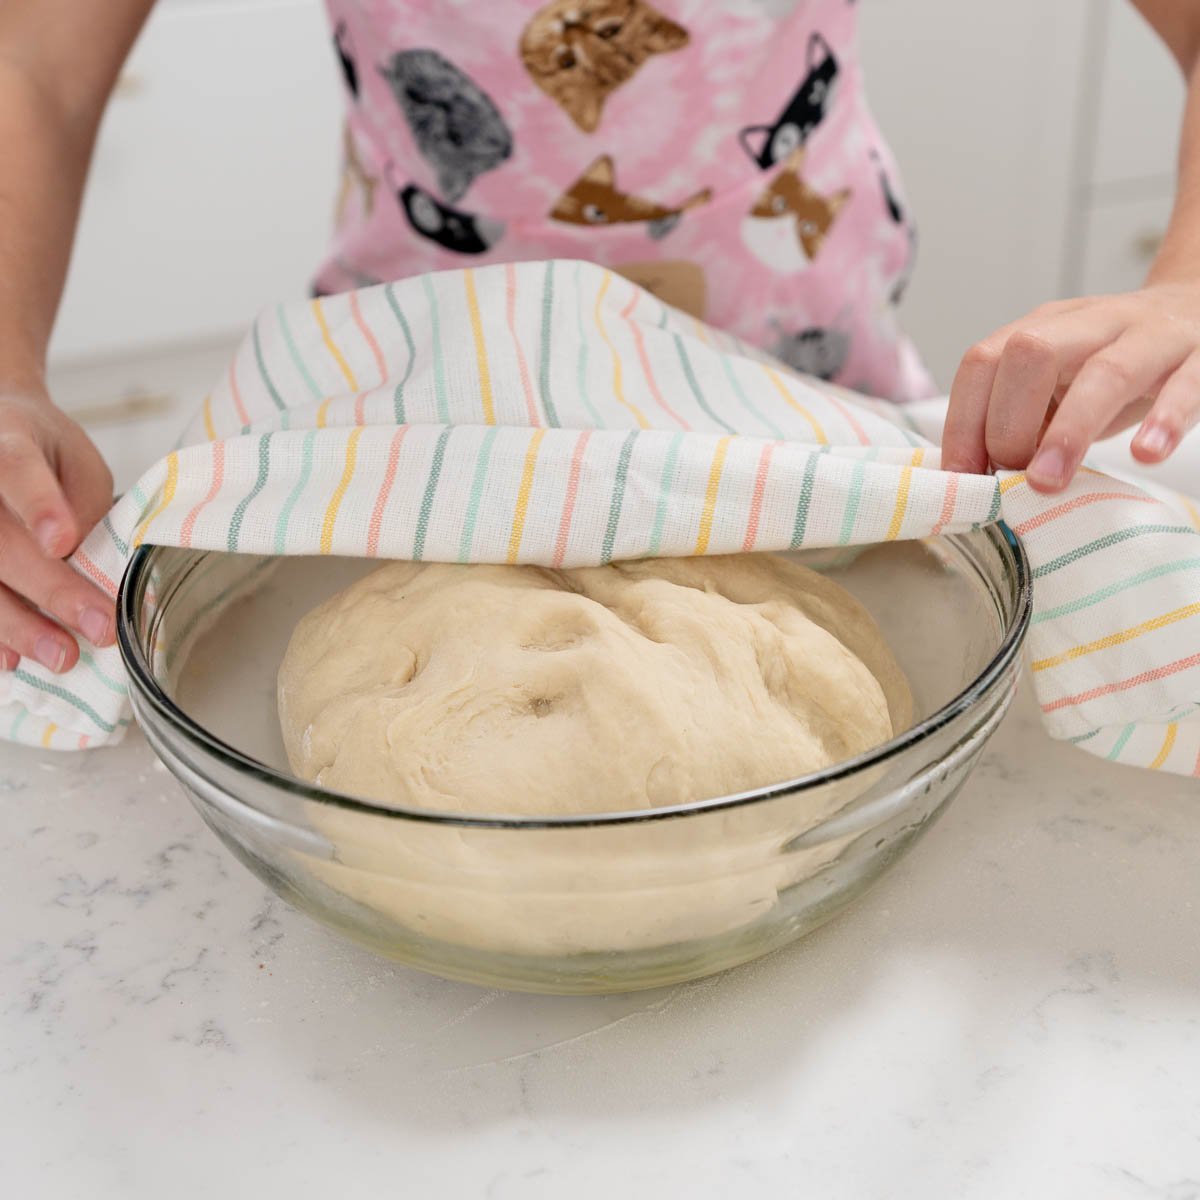 covering dough to proof